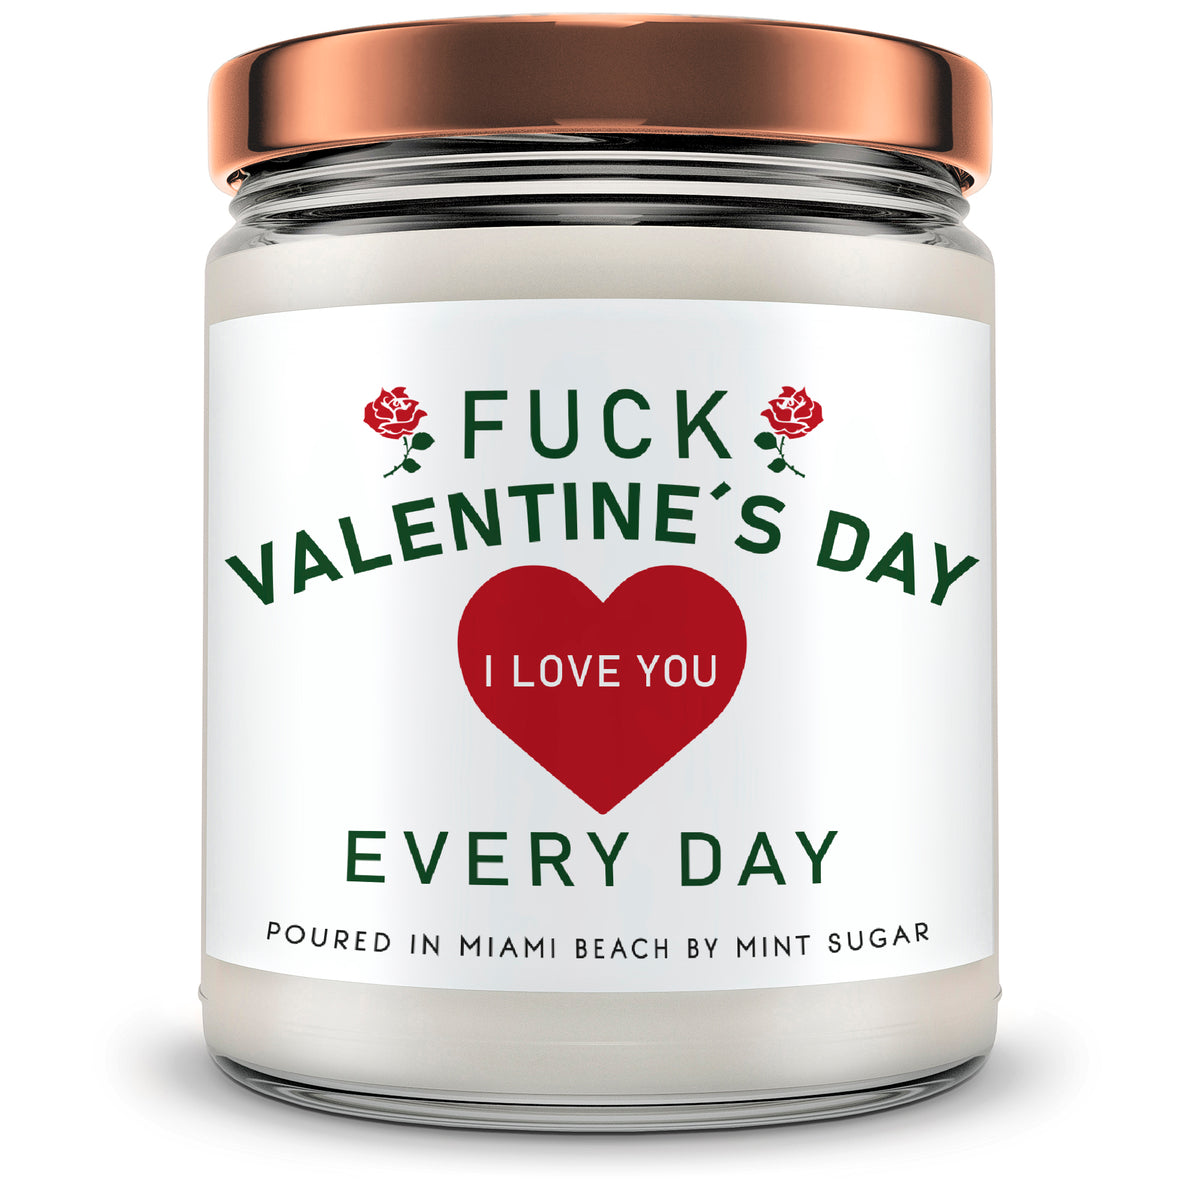 Fuck Valentine's Day, I Love you Every Day! - Mint Sugar Candle